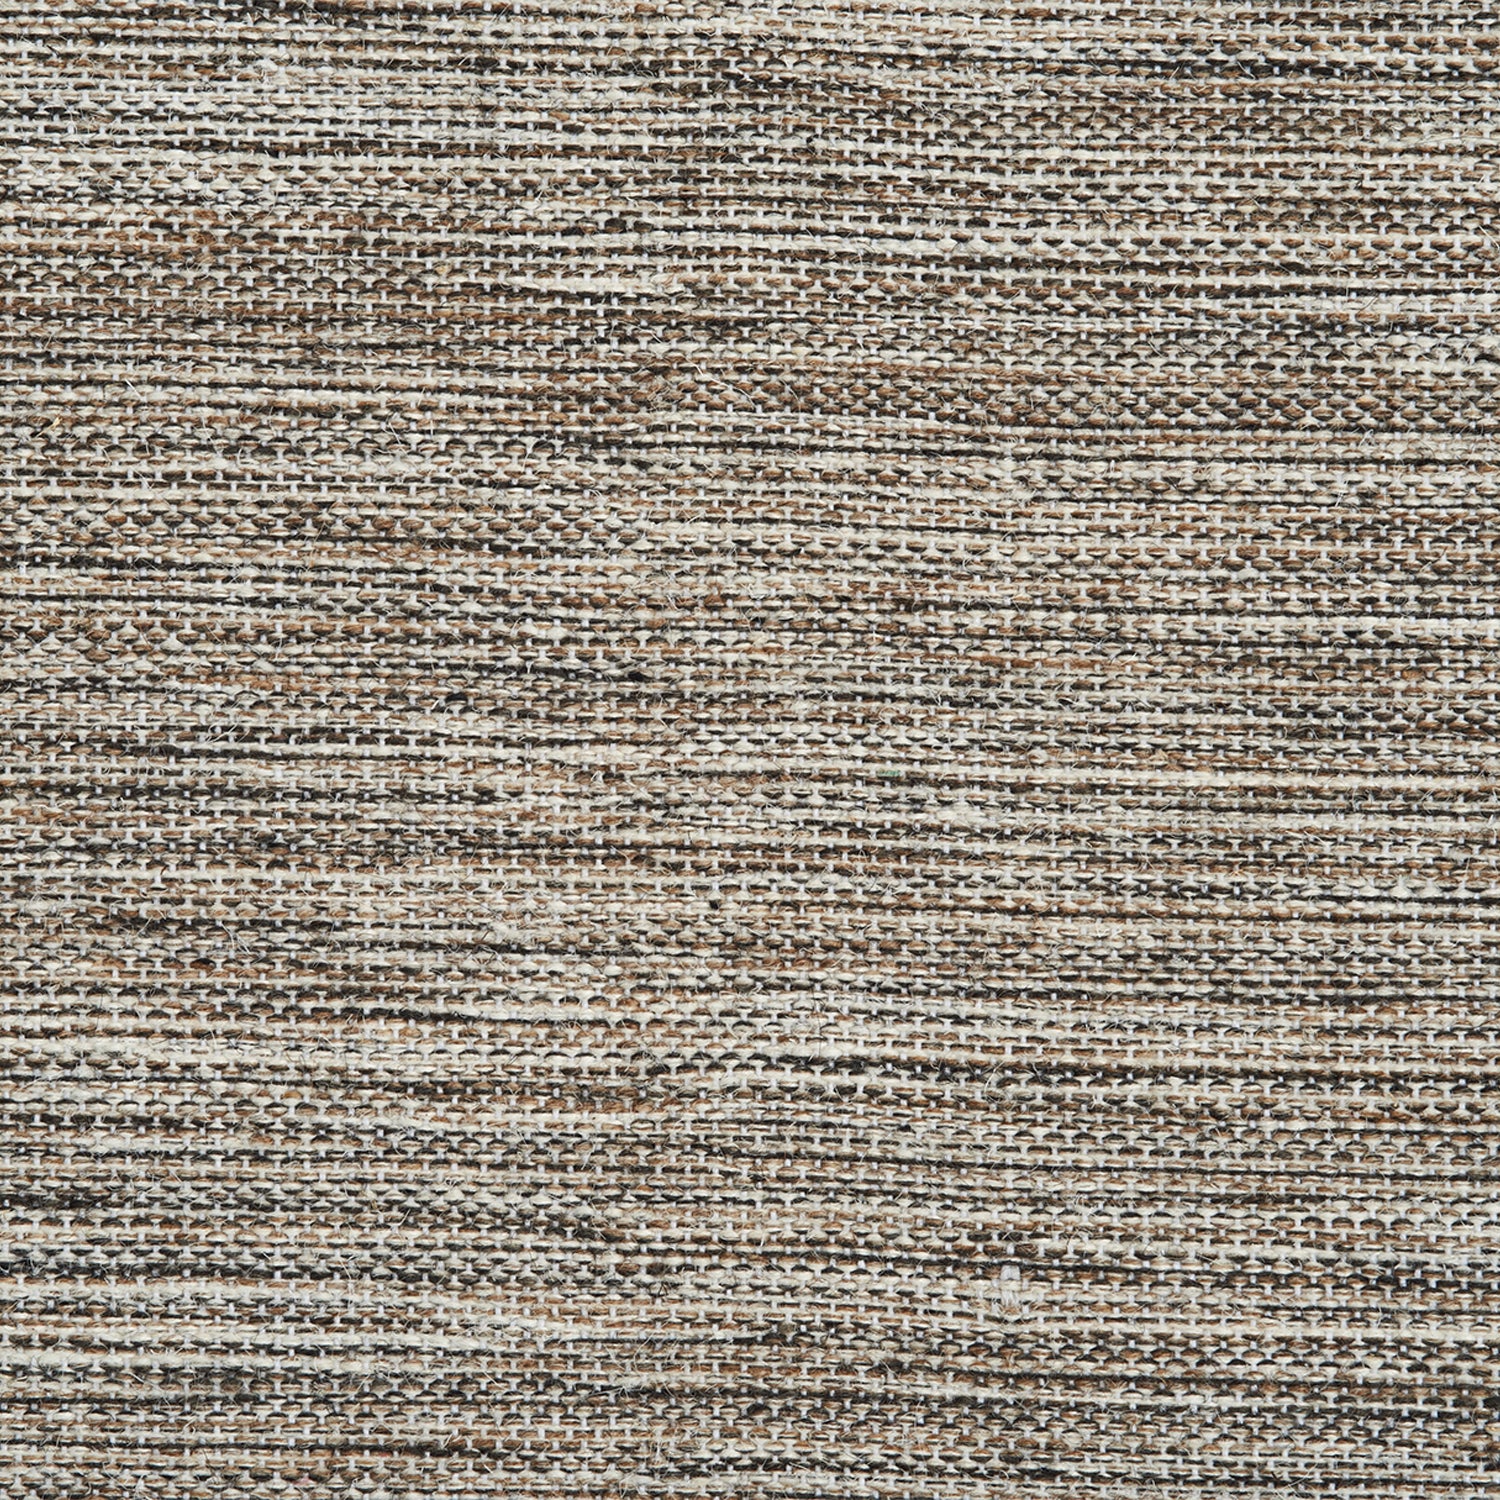 Wool-blend broadloom carpet swatch in a chunky mottled cream, tan and brown weave.